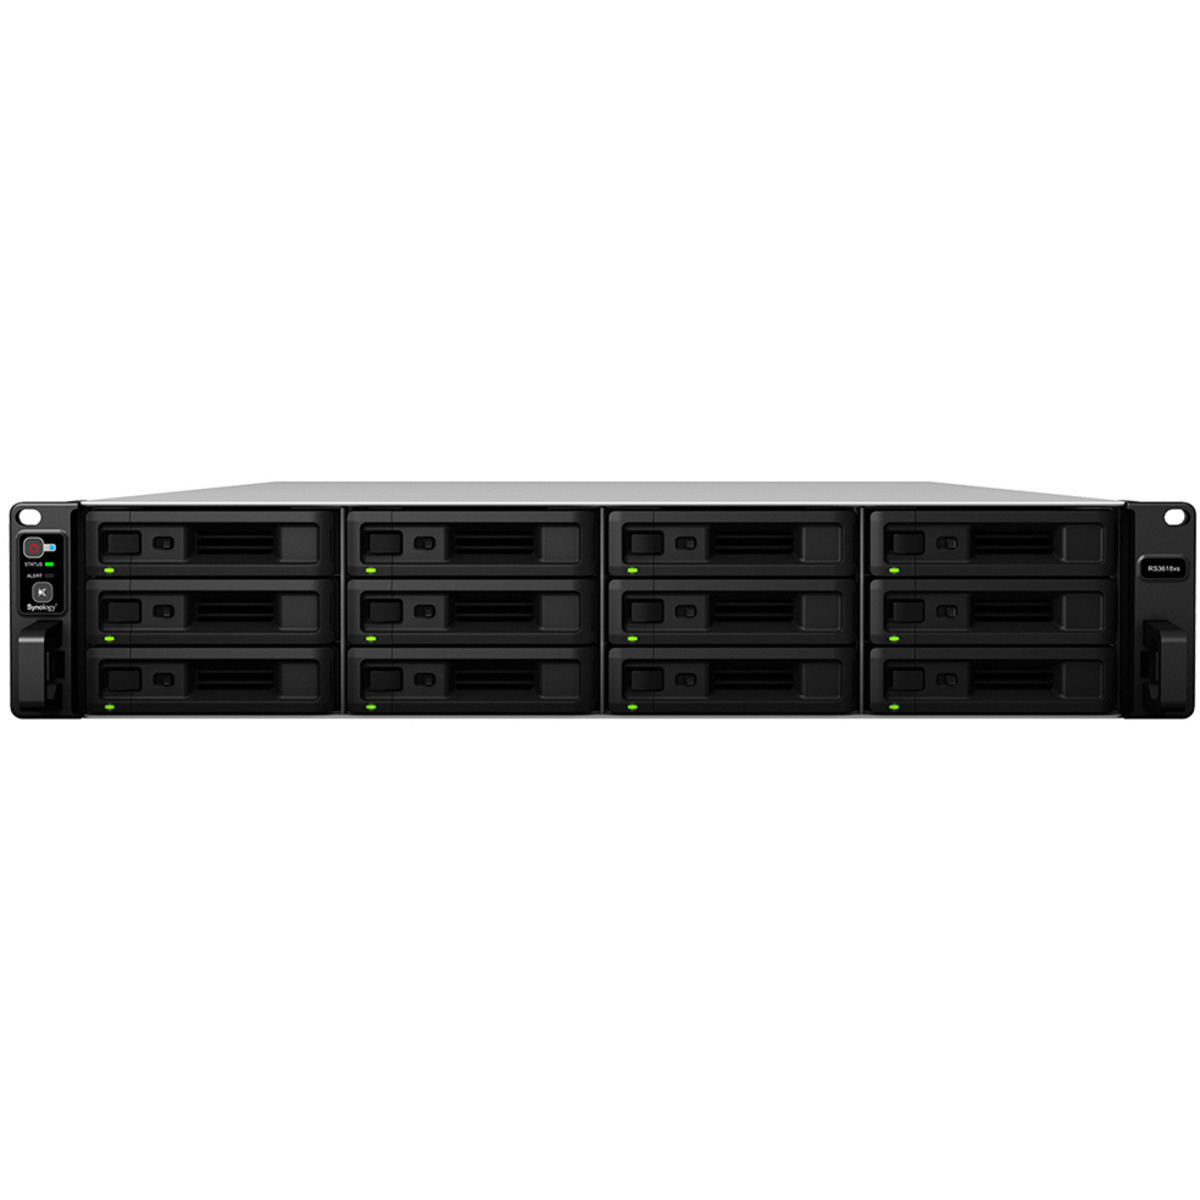 Synology RackStation RS3618xs 90tb 12-Bay RackMount Large Business / Enterprise NAS - Network Attached Storage Device 9x10tb Seagate IronWolf ST10000VN000 3.5 7200rpm SATA 6Gb/s HDD NAS Class Drives Installed - Burn-In Tested RackStation RS3618xs